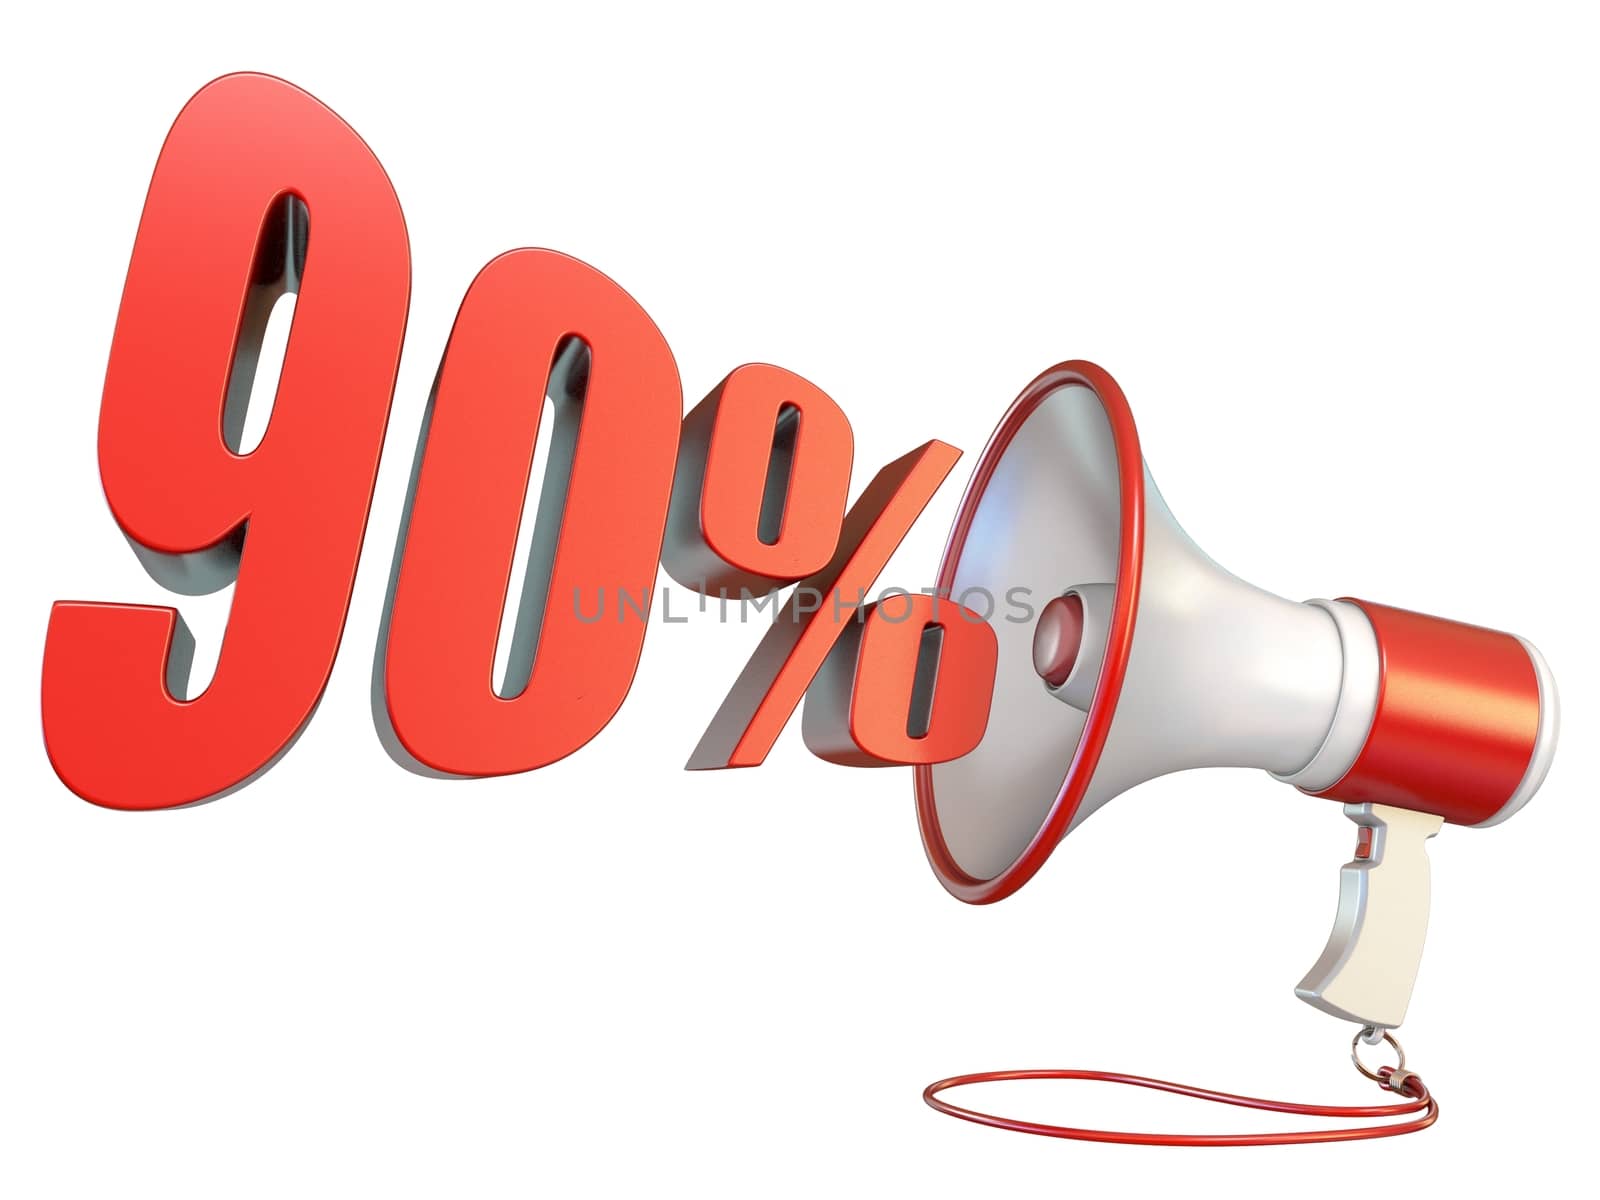 90 percent sign and megaphone 3D rendering illustration isolated on white background